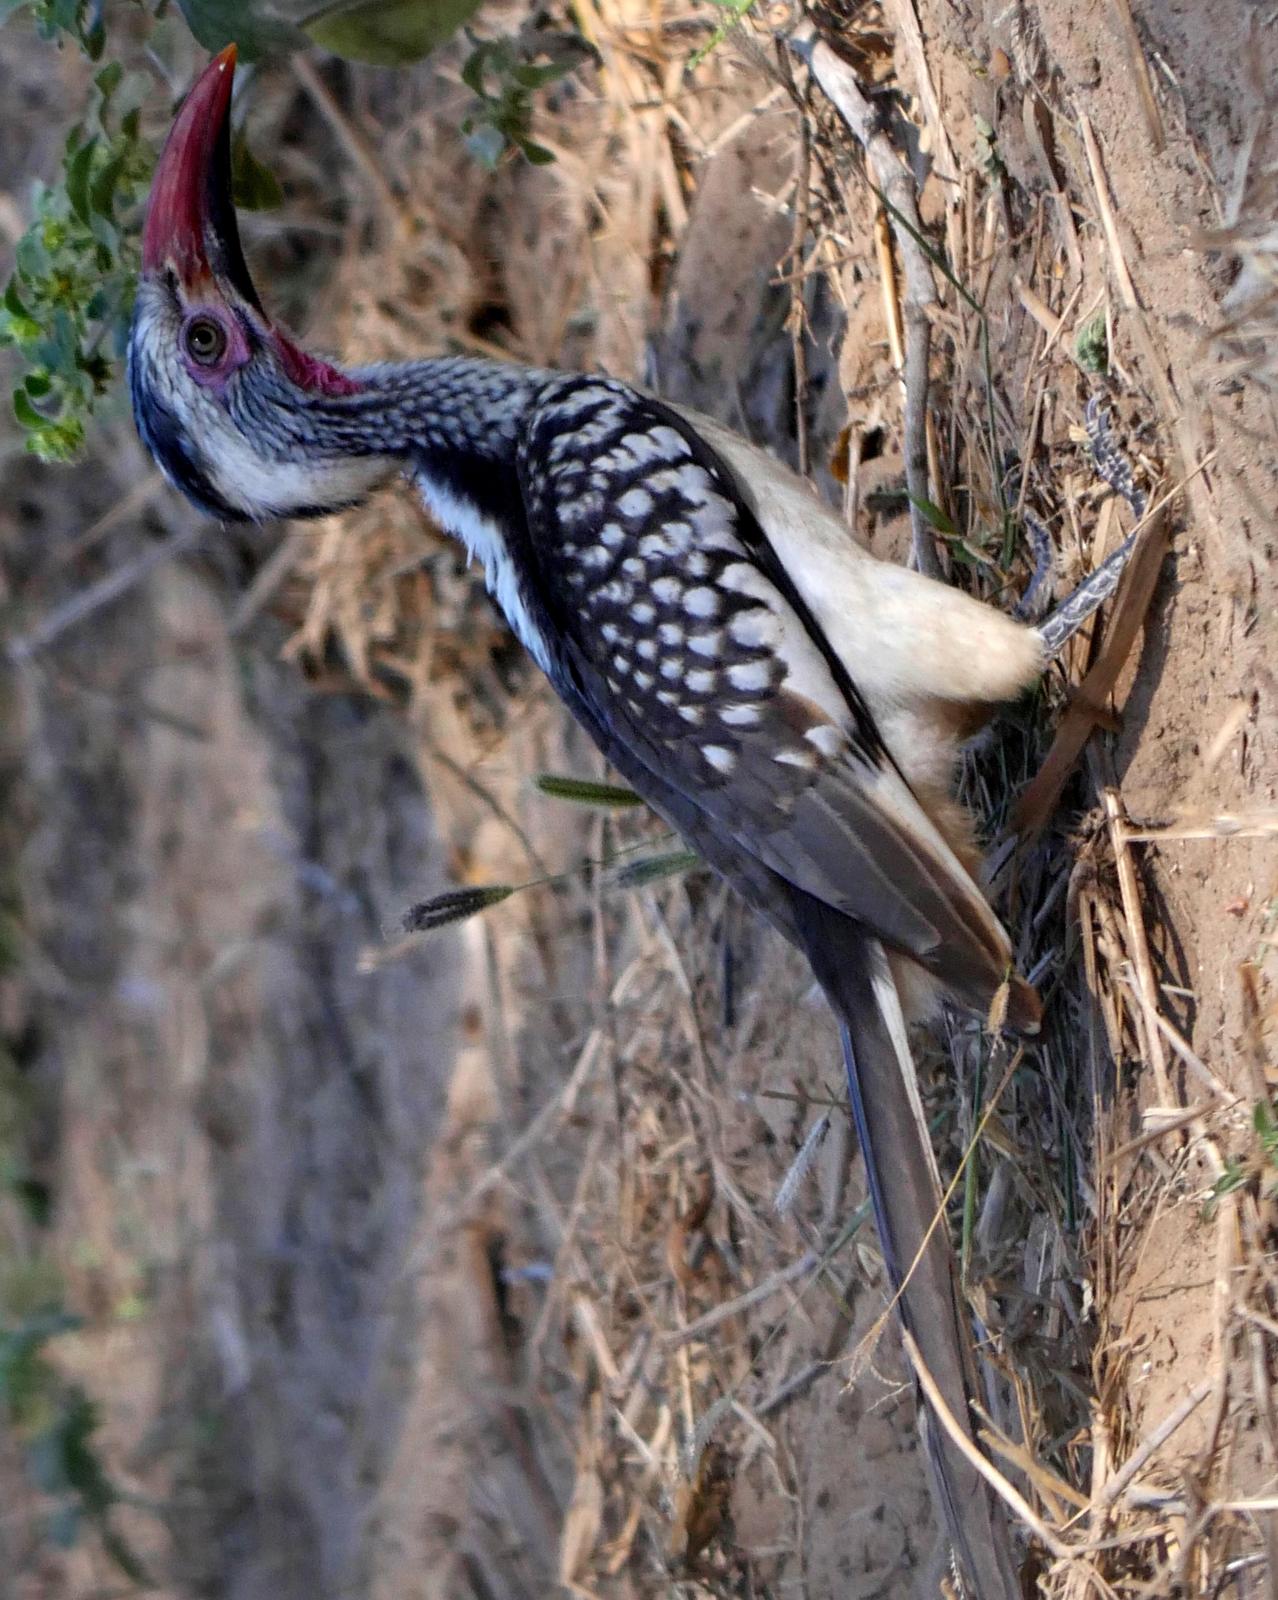 Southern Red-billed Hornbill Photo by Peter Lowe